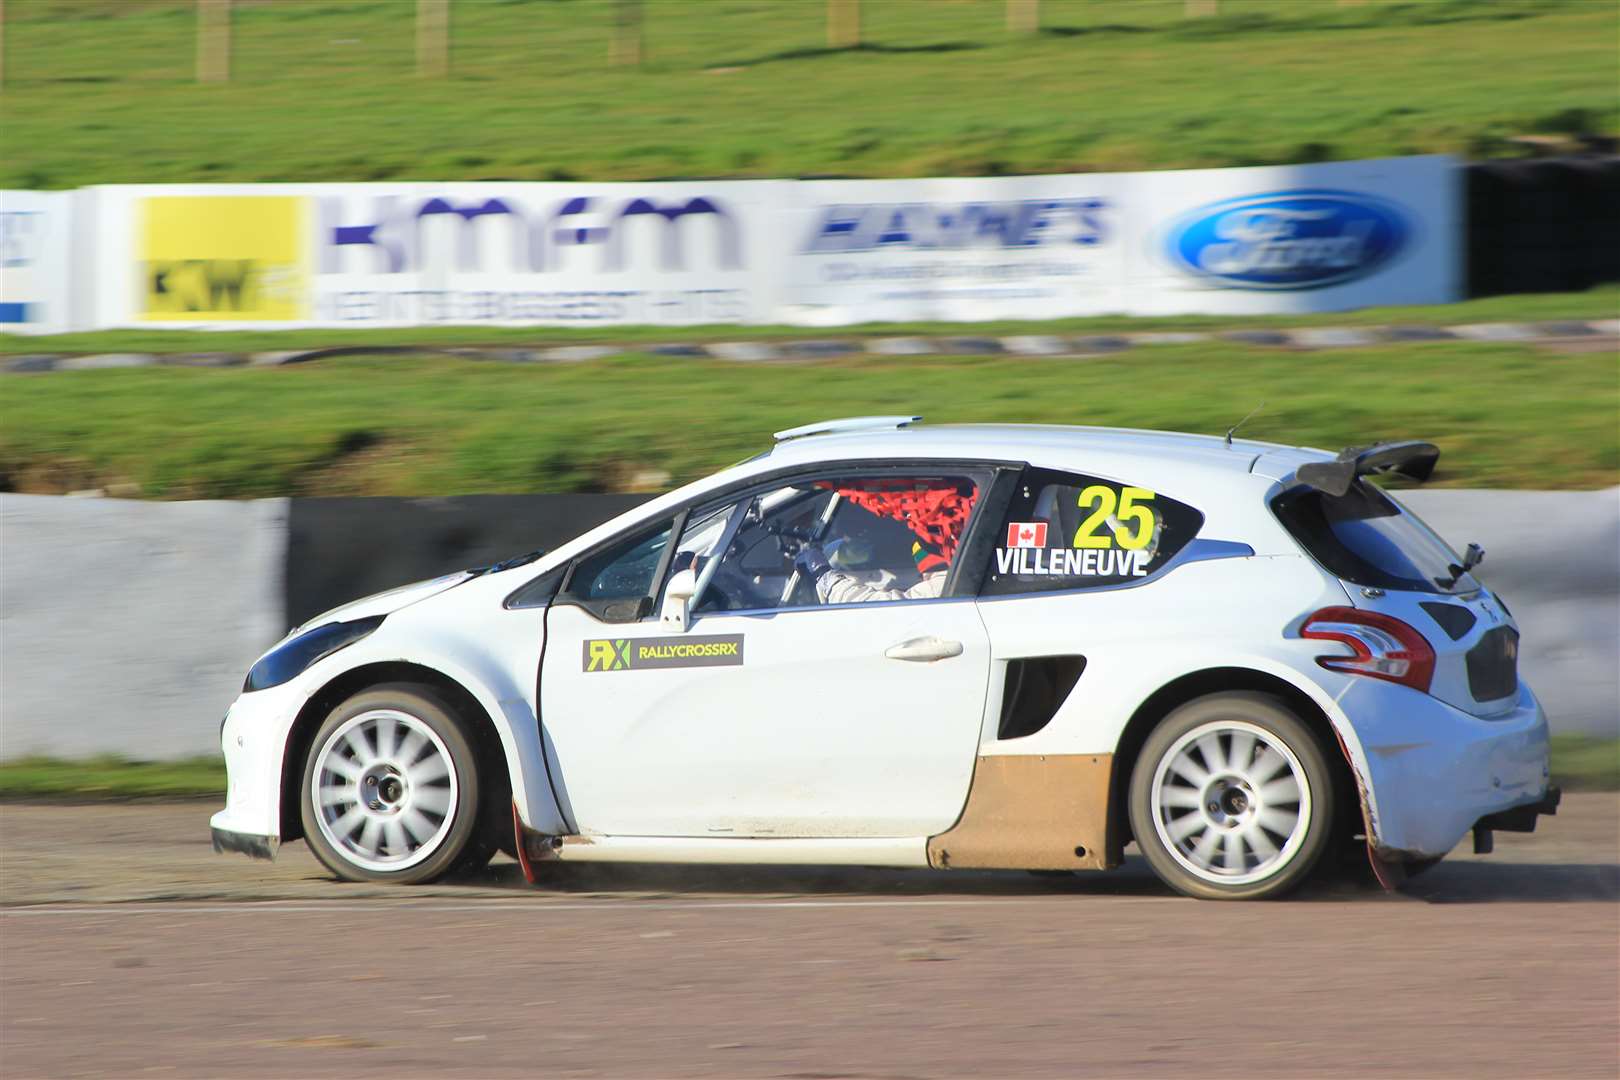 Jacques Villeneuve has tested at Lydden this year - but won't return. Picture - Joe Wright